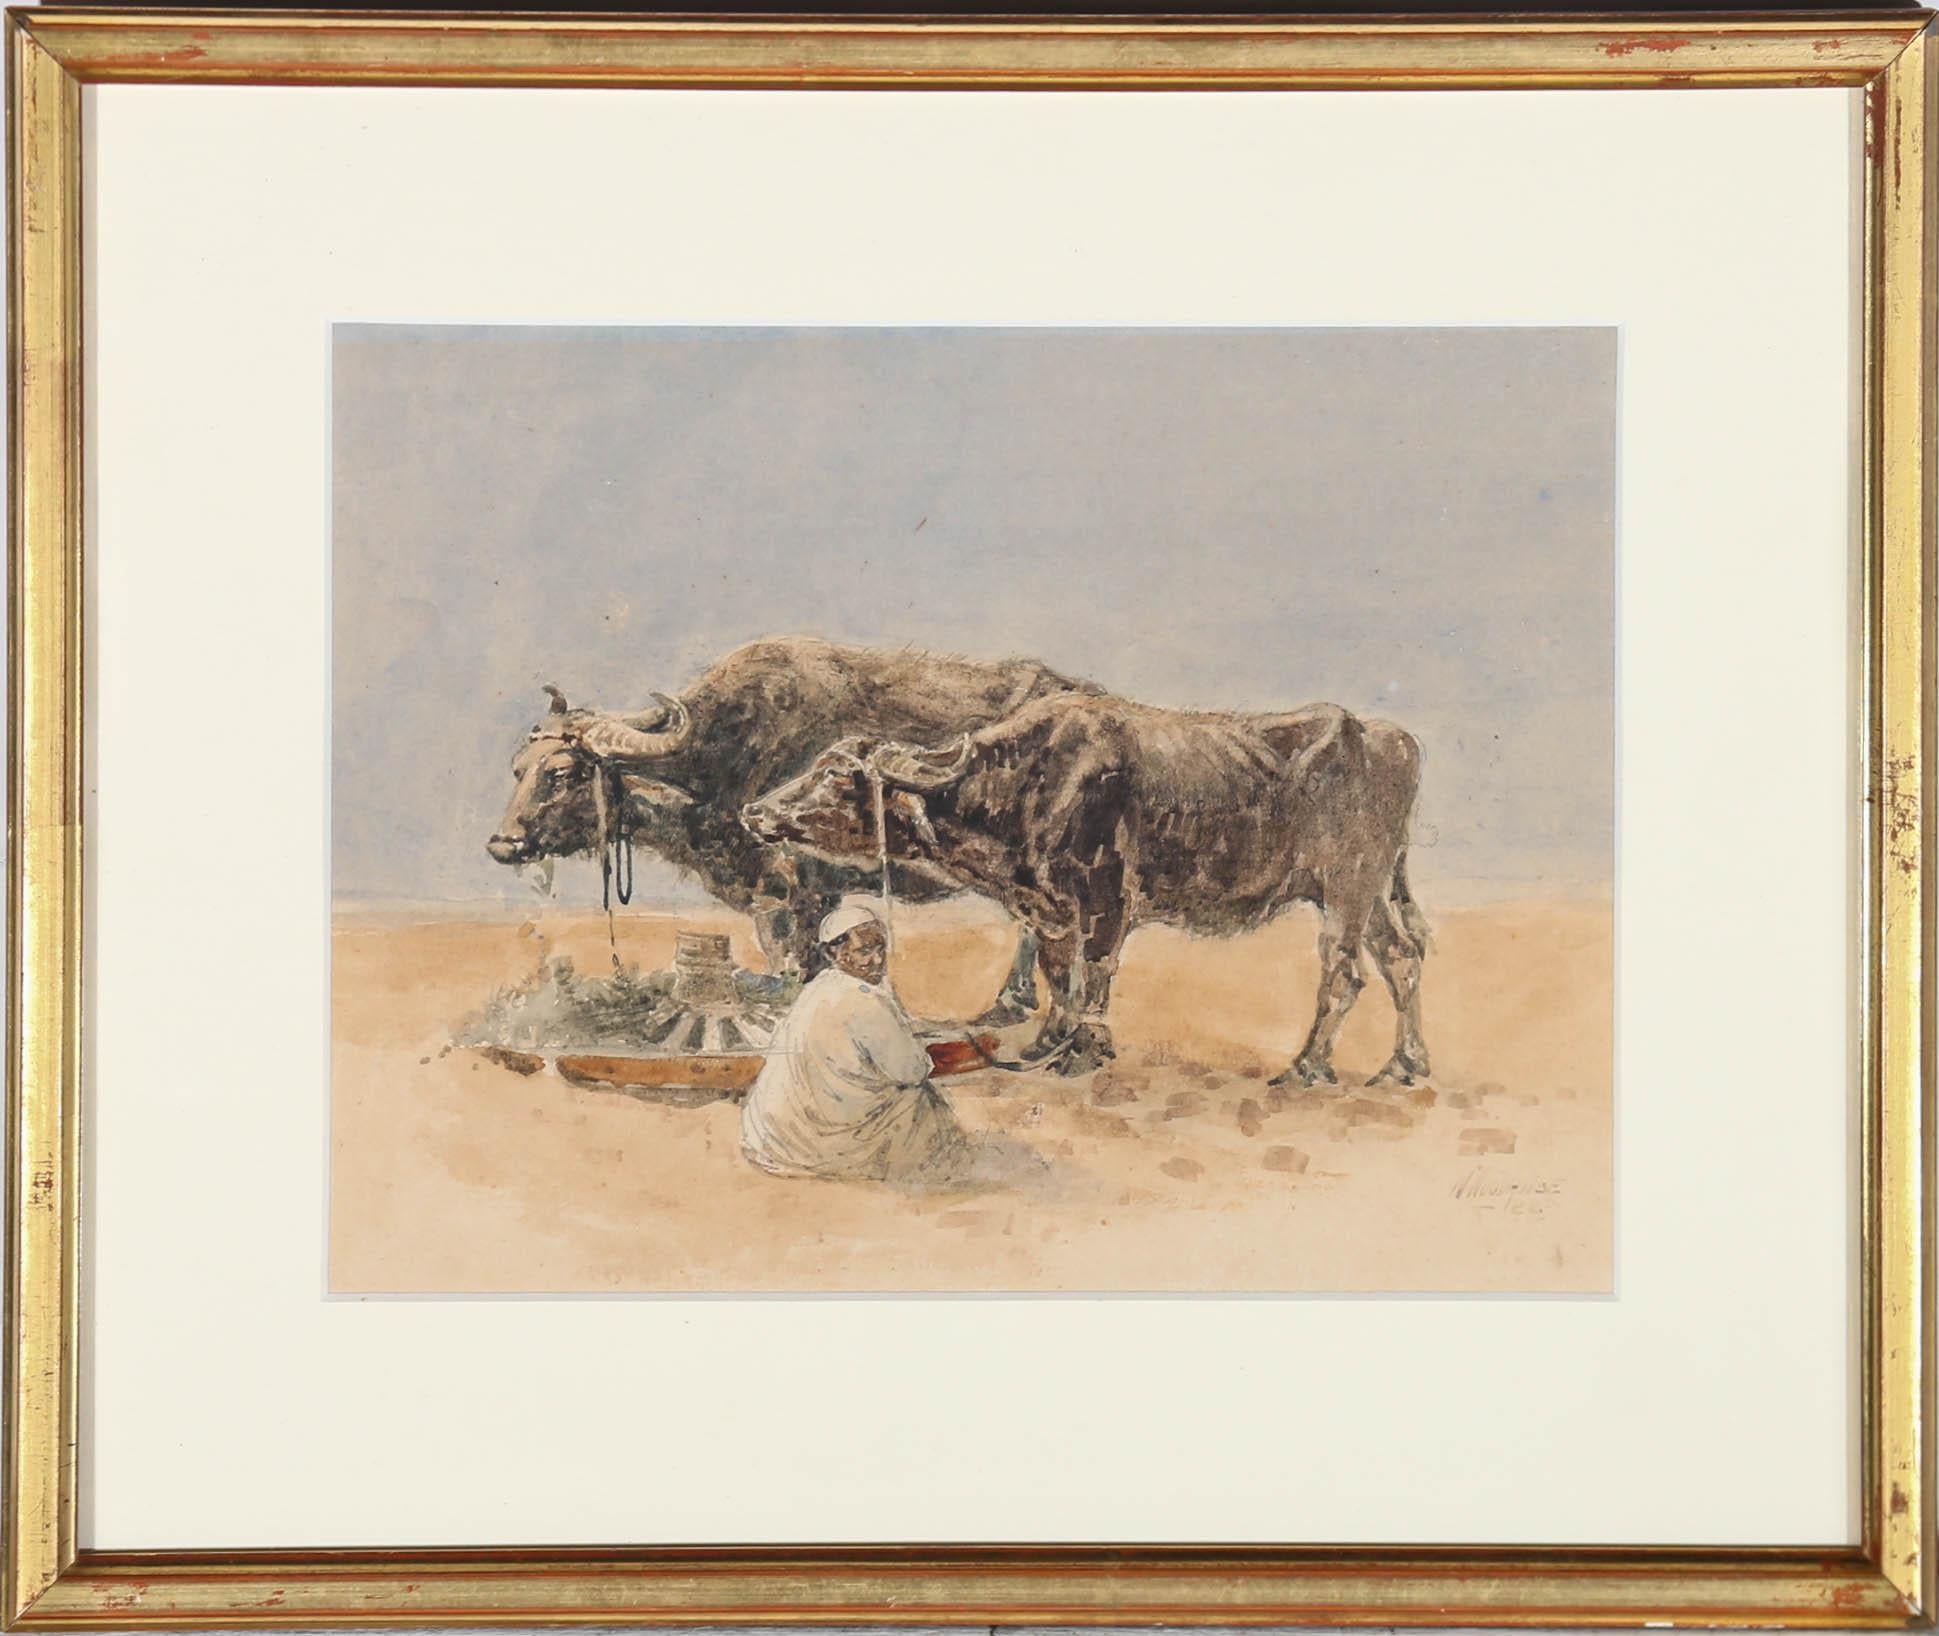 William Woodhouse (1857-1939) - Framed 1889 Watercolour, Oxen in the Desert